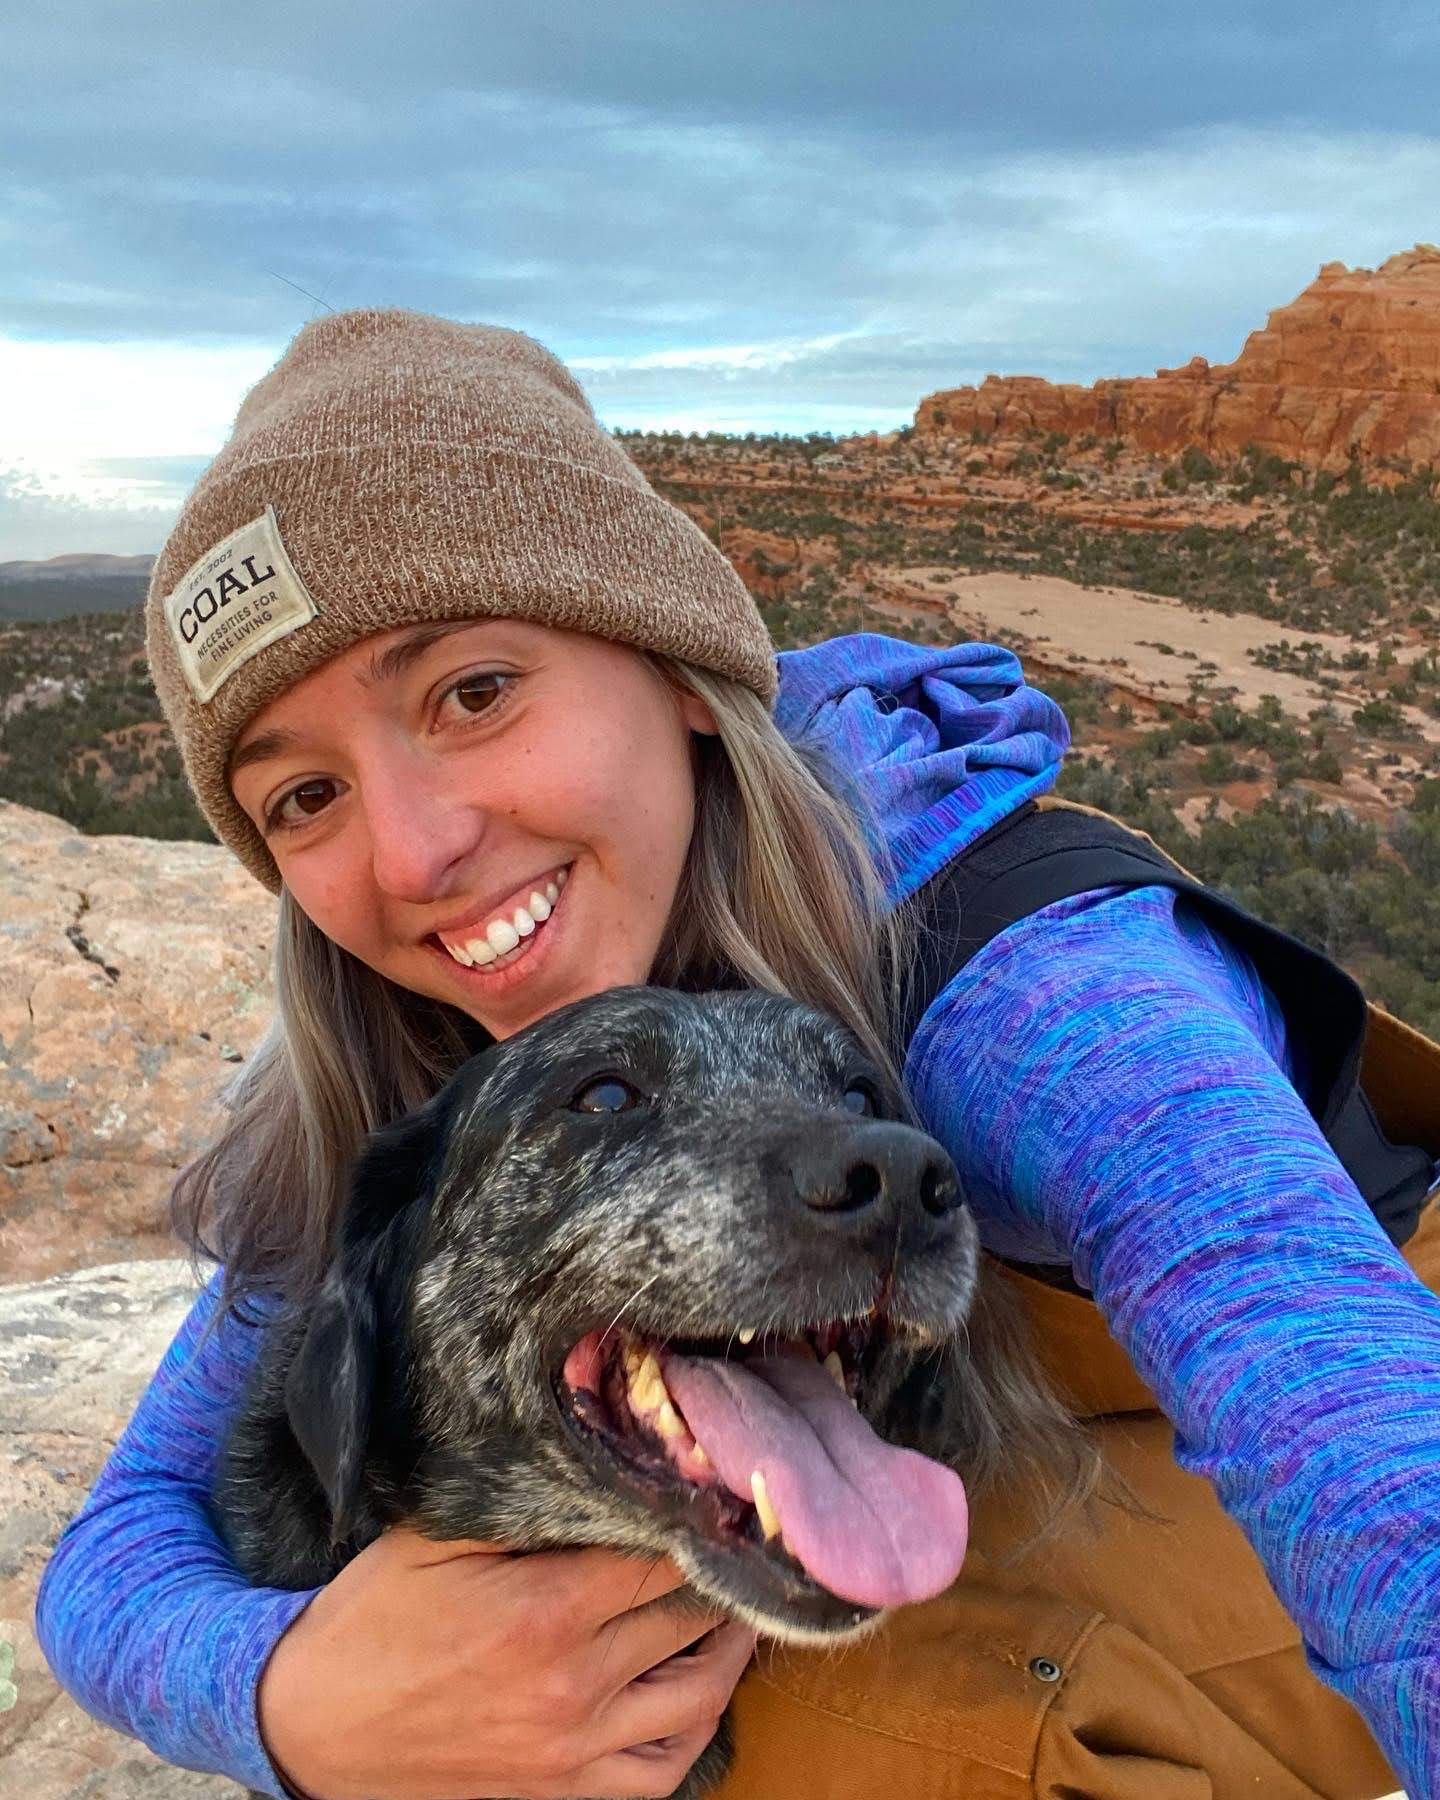 Caralie Fennessey with her dog.